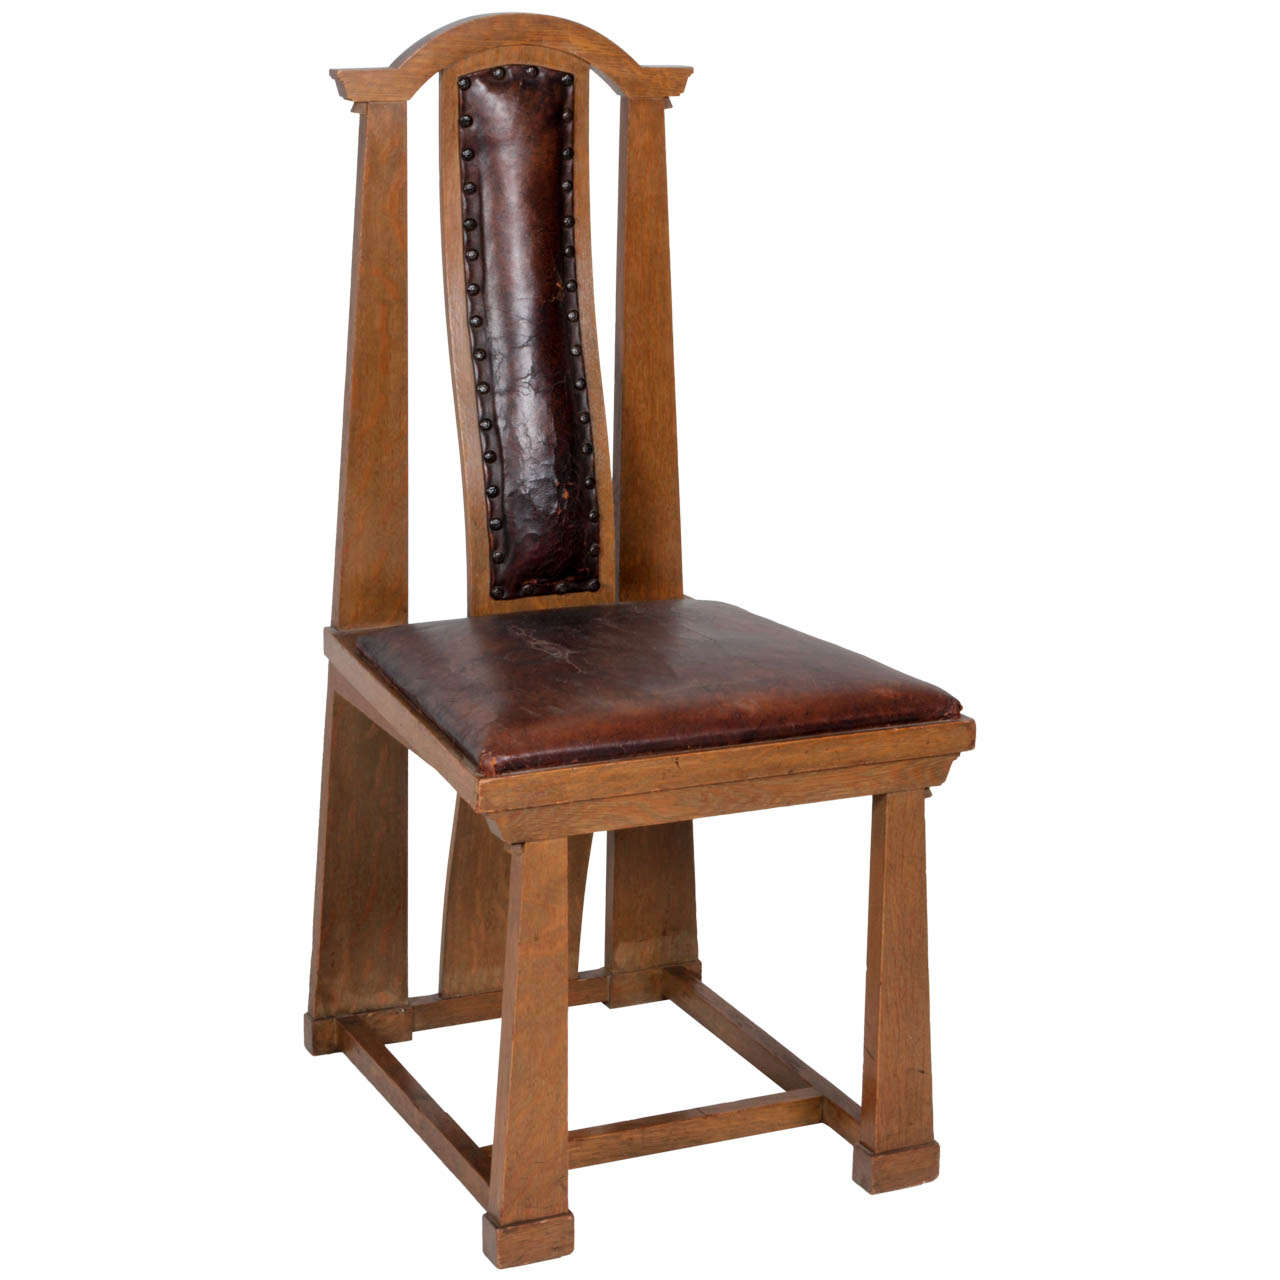 George Washington Maher "Rockledge" Arts and Crafts Side Chair, 1911-1912 For Sale